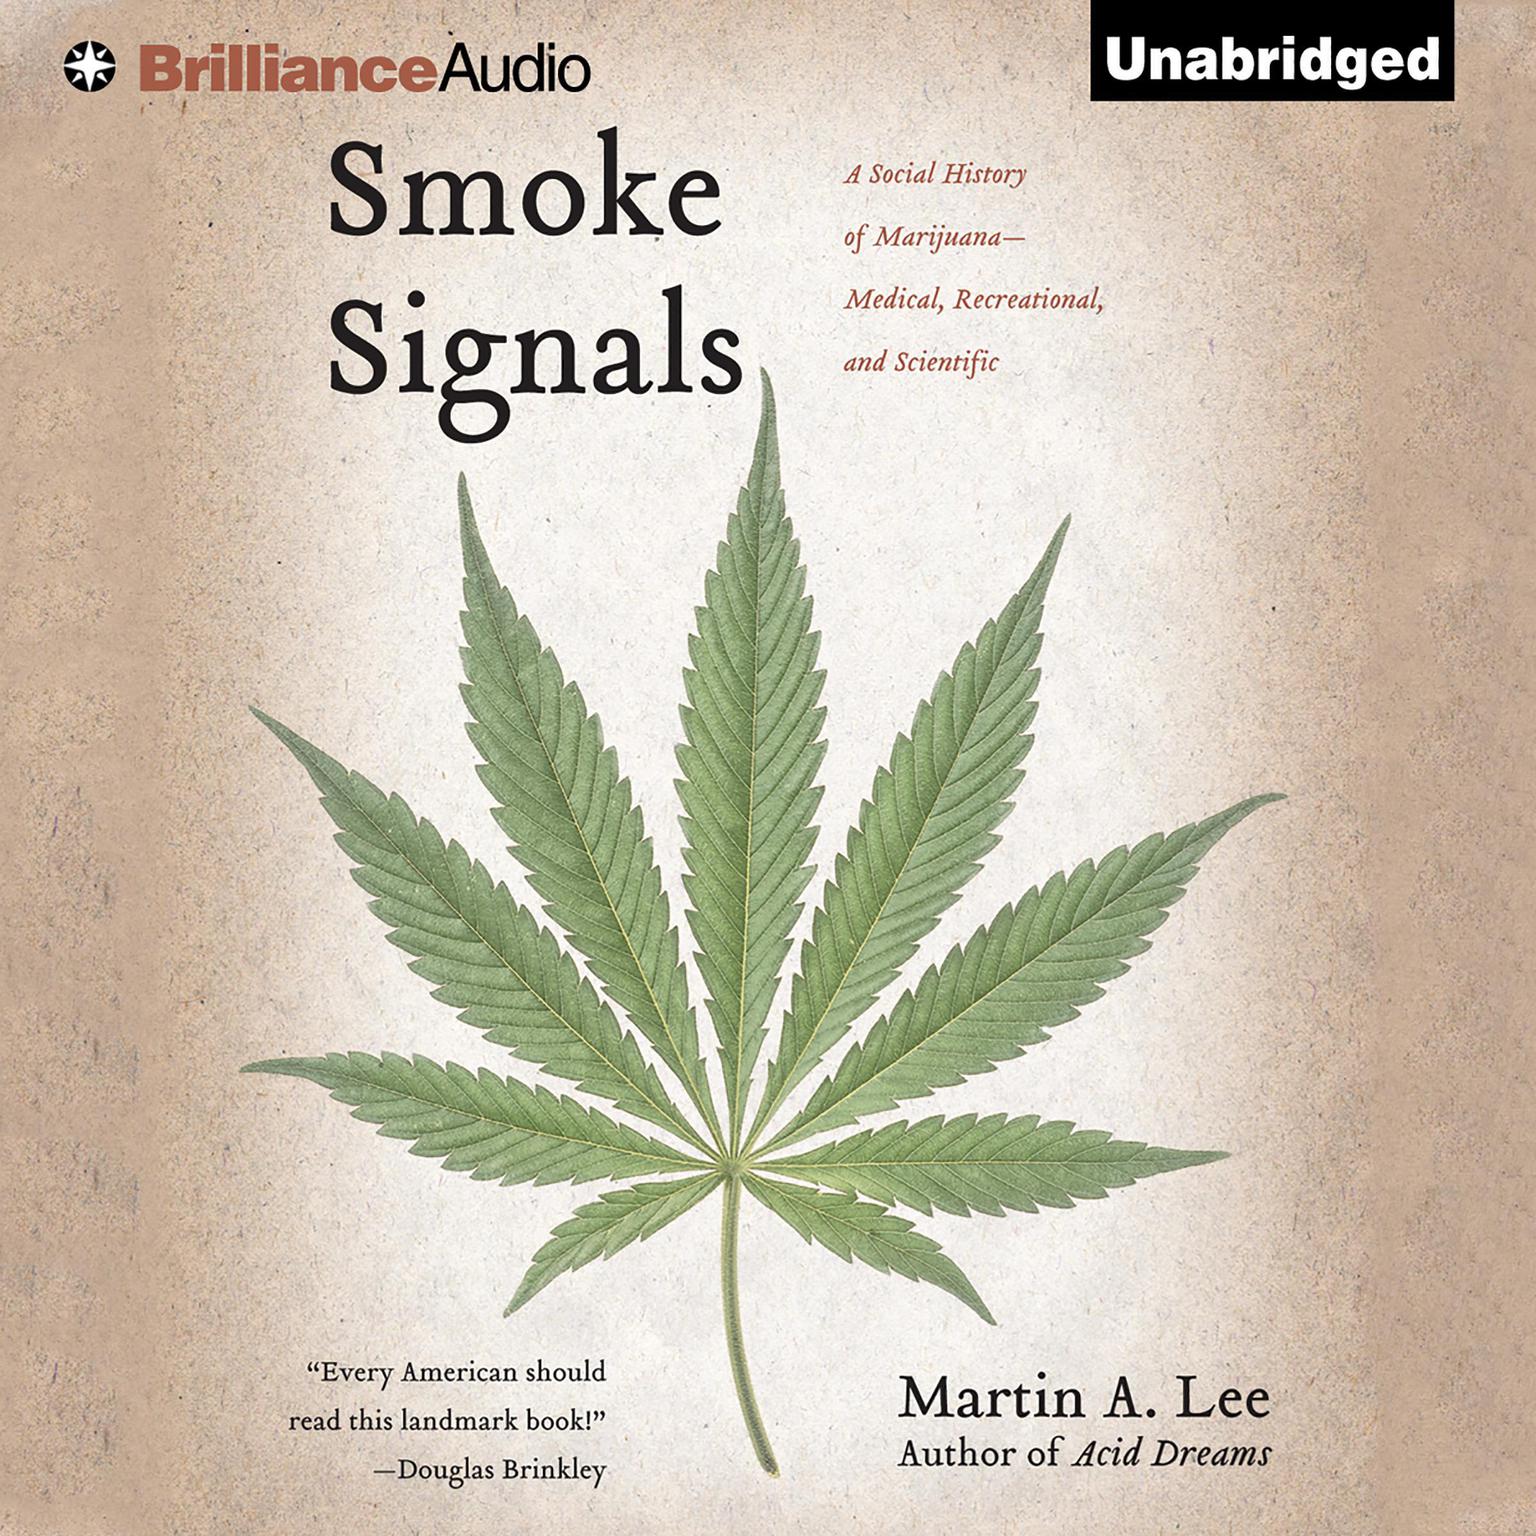 Smoke Signals: A Social History of Marijuana - Medical, Recreational, and Scientific Audiobook, by Martin A. Lee